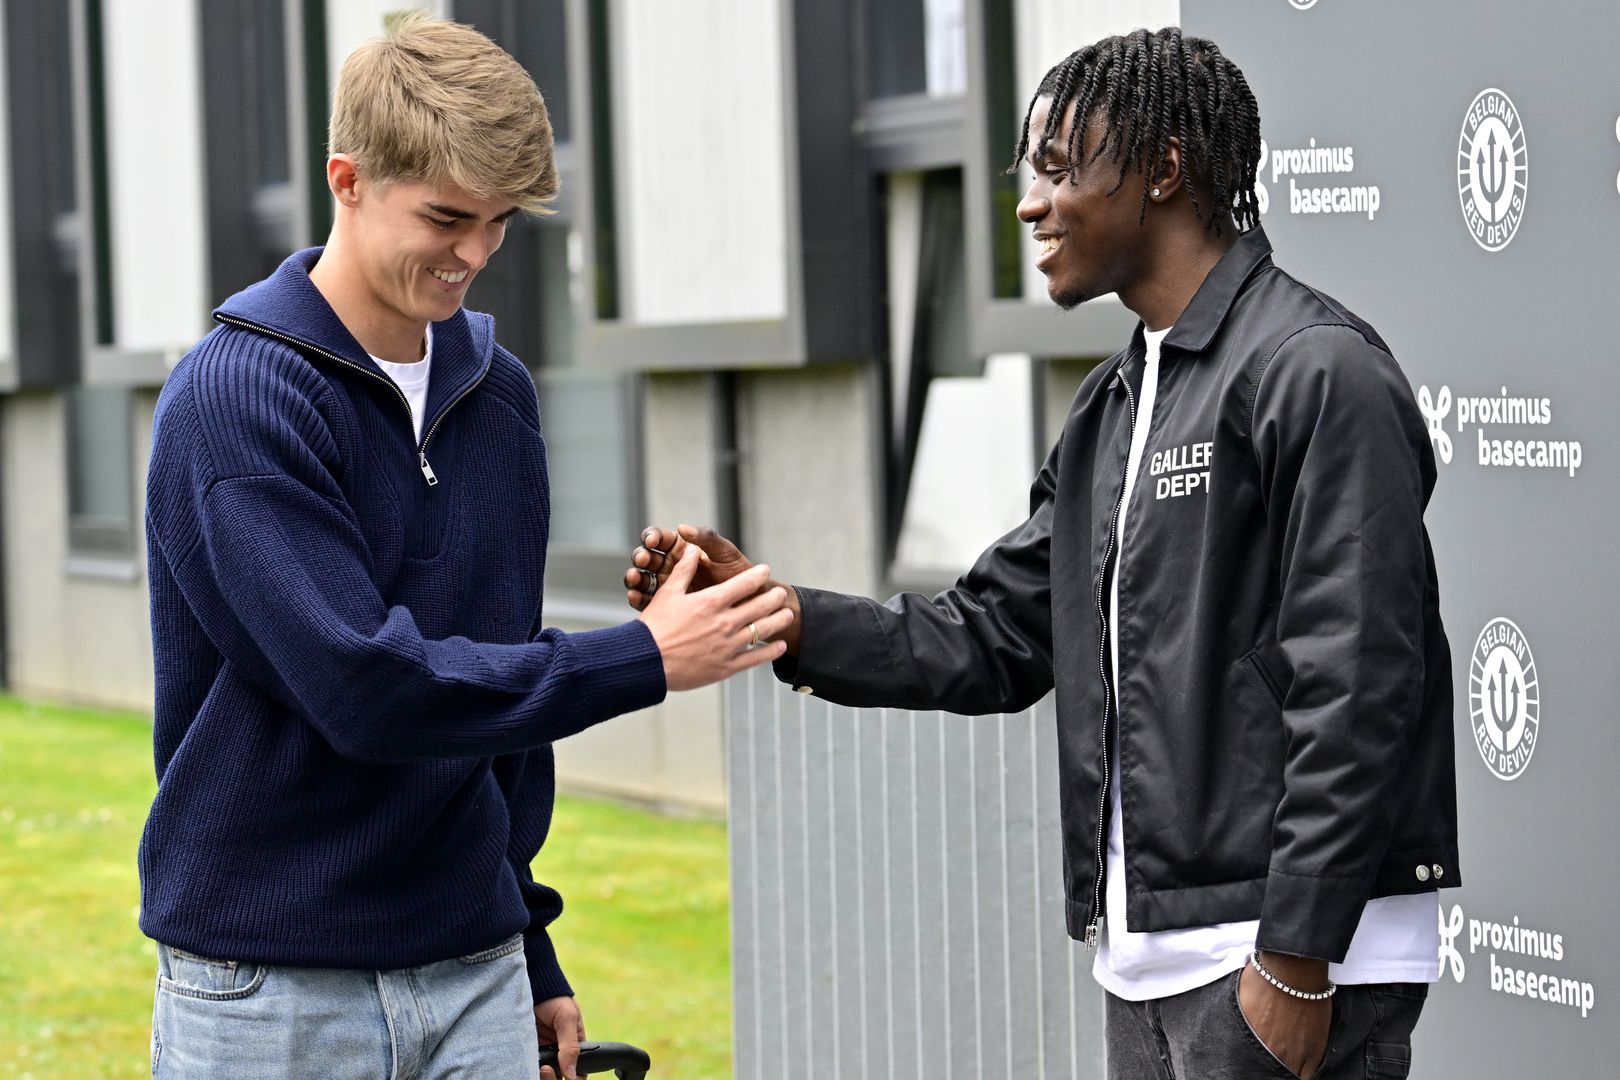 Tubize, Belgium - March 20 : De Ketelaere Charles midfielder of Belgium and Lavia Romeo midfielder of Belgium arrives at the Martin's Red Hotel prior to the Euro 2024 qualification match against Sweden at the RBFA Headquarters on on March 20, 2023 in Tubize, Belgium, 20/03/2023 ( Photo by Peter De Voecht / Photonews